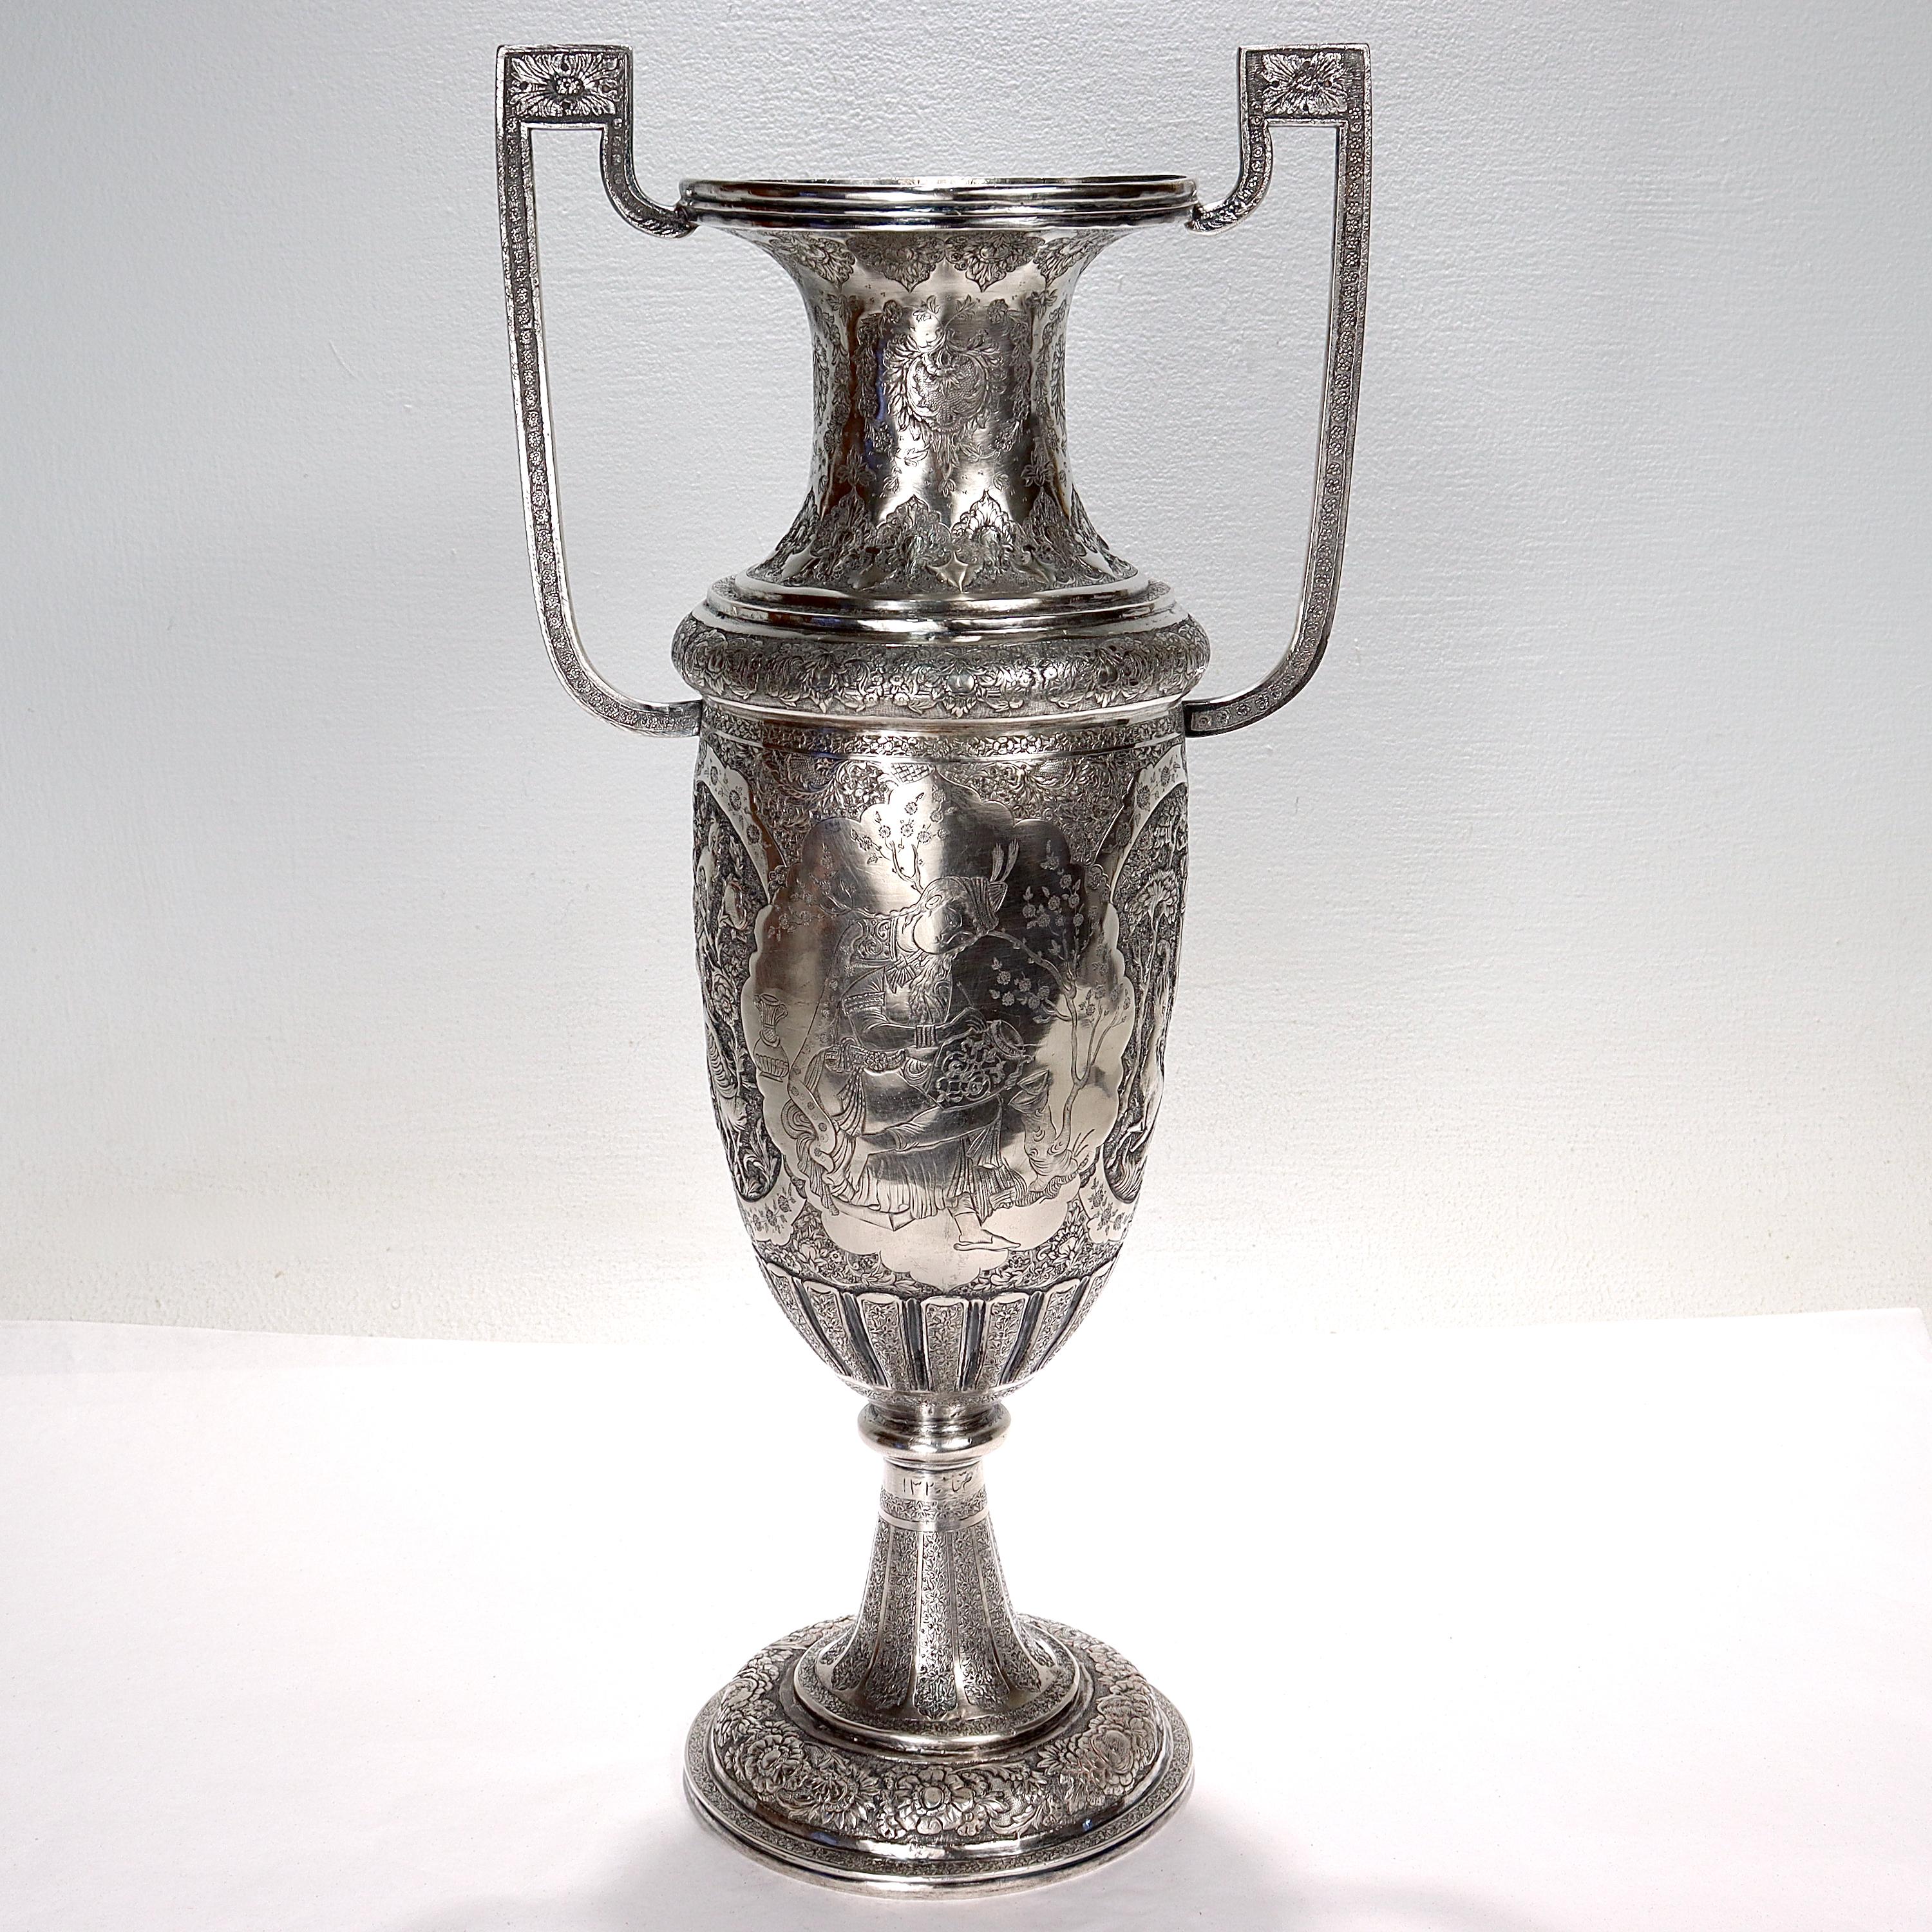 A fine large old or antique Islamic silver vase.

With twin handles and supported on a pedestal foot. 

The vase has figural incised decorations to cartouches on both the front and verso. The front cartouche depicts an artist decorating a vase (or